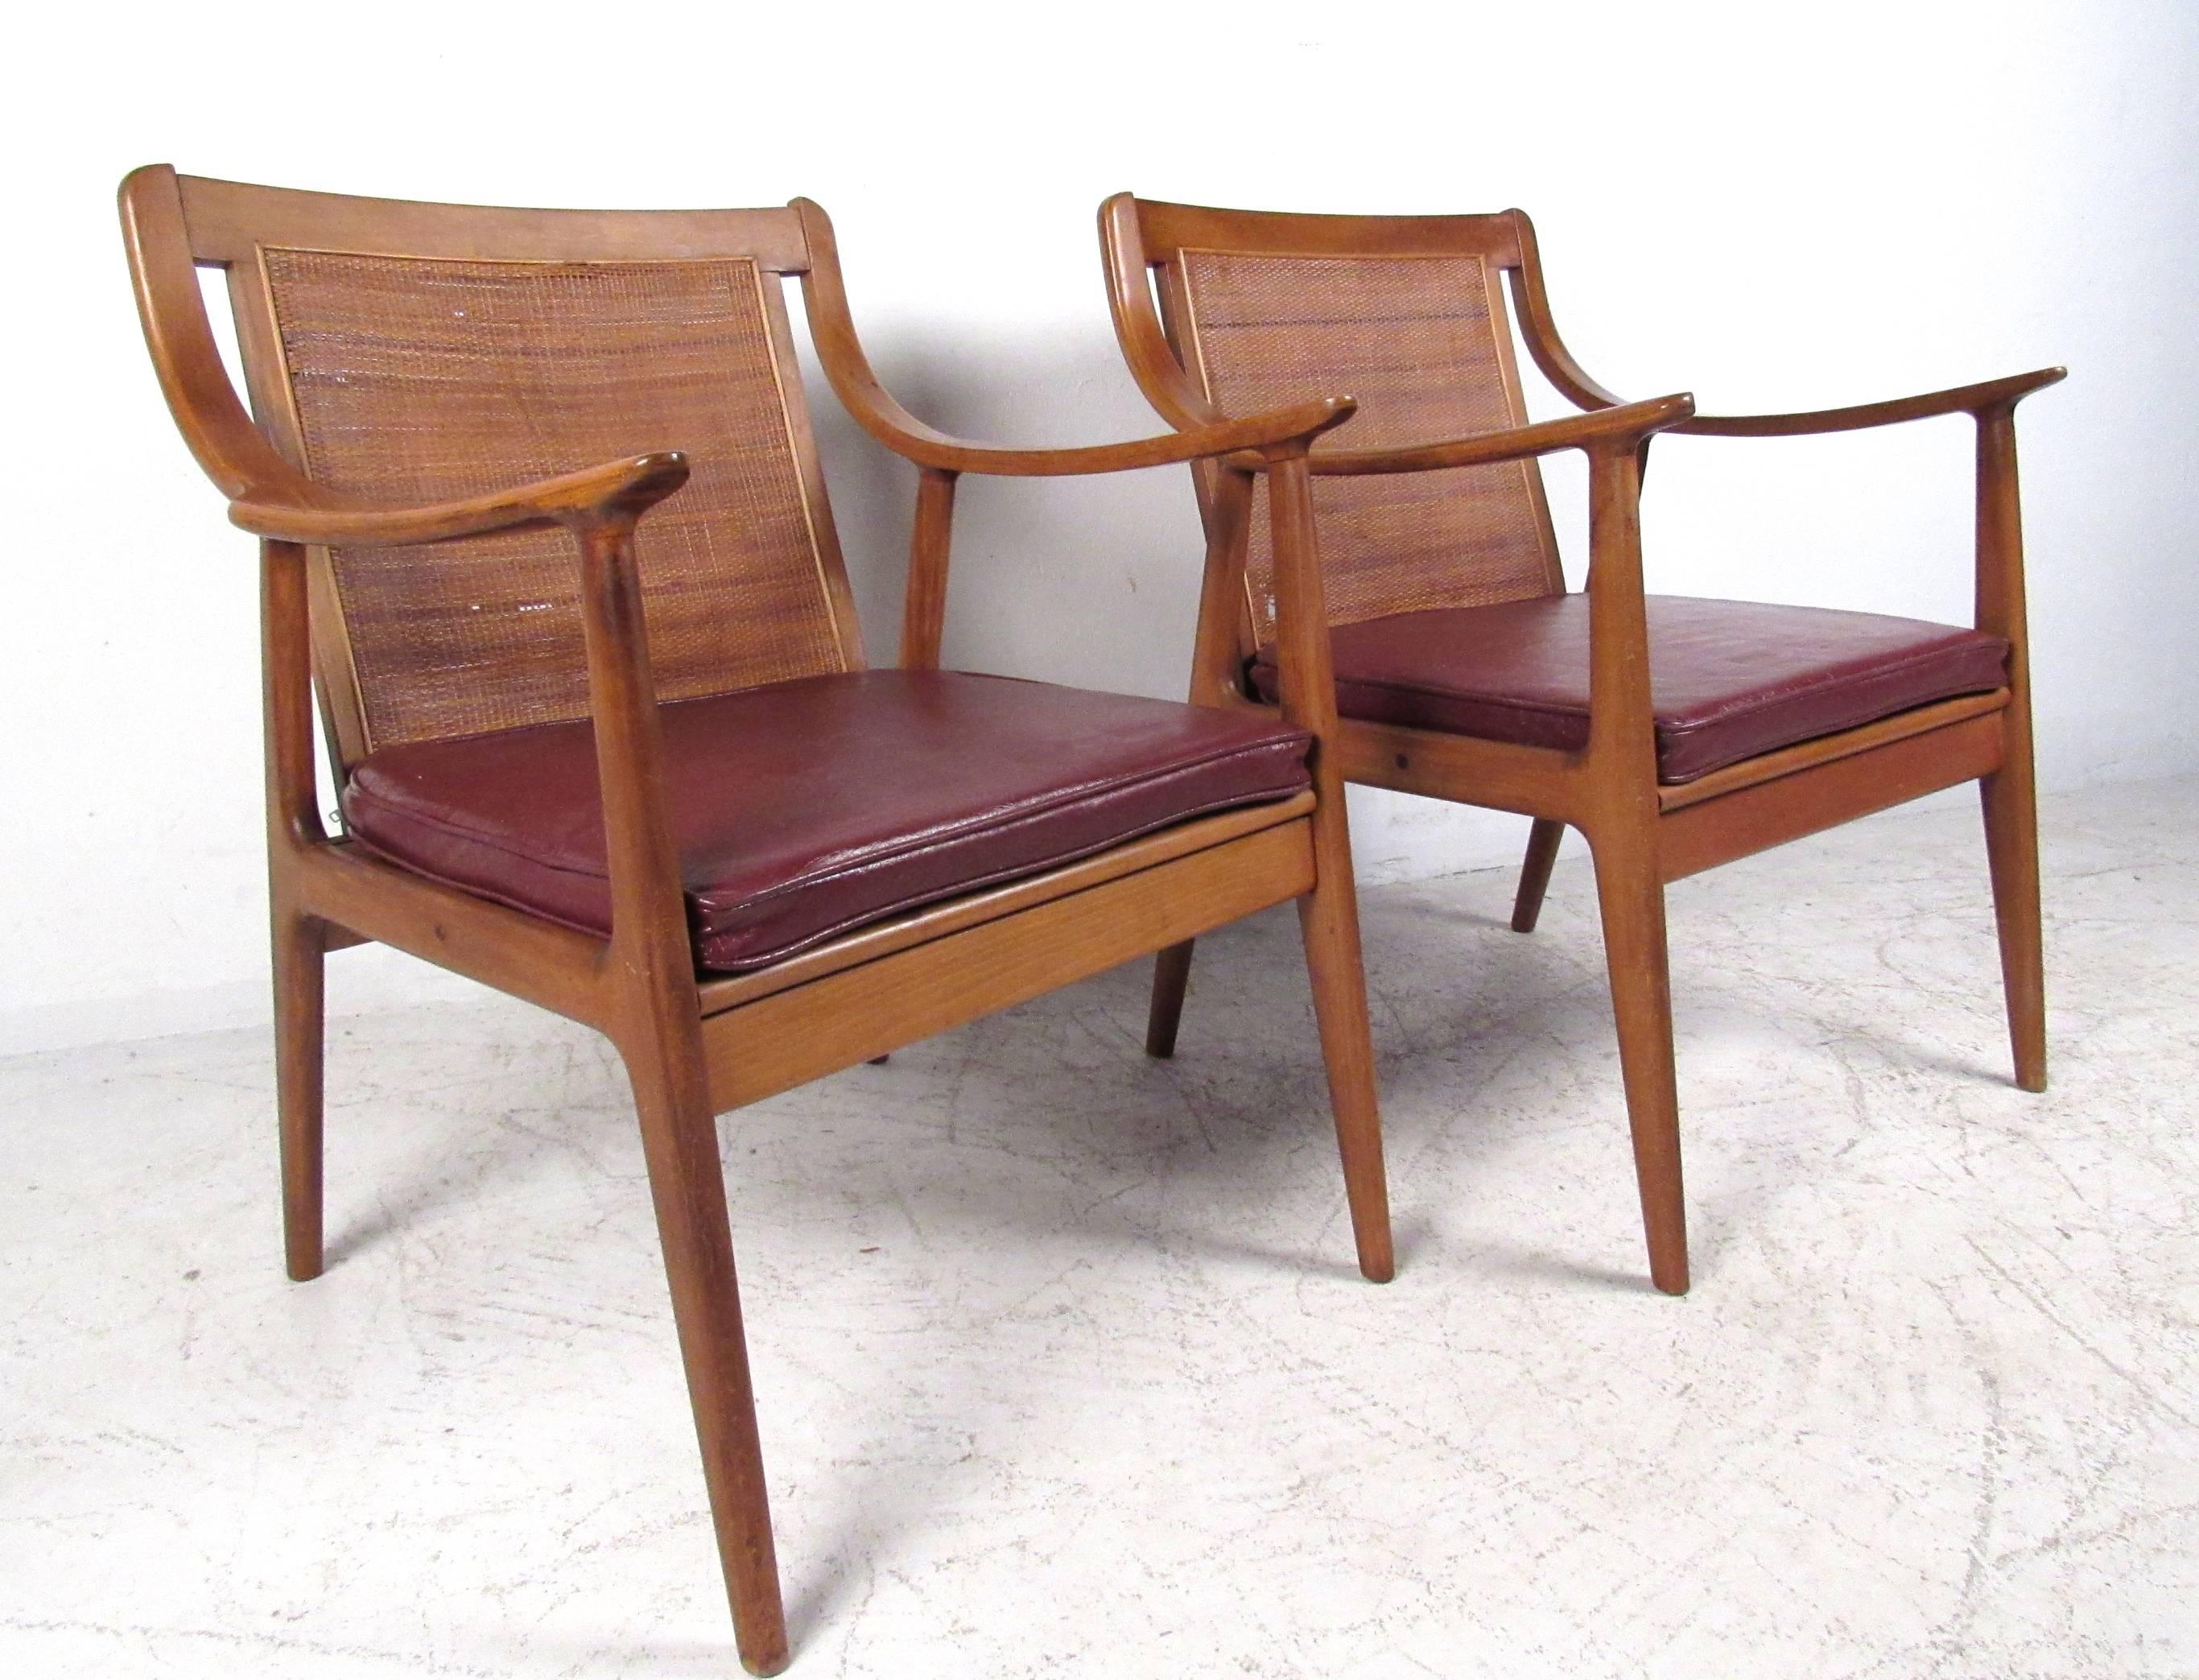 This stylish pair of cane back chairs make a comfortable vintage addition to any interior. Wonderfully crafted chair frames feature sloped style sculptural arm rests, upholstered seats, and tapered legs. Please confirm item location (NY or NJ). 